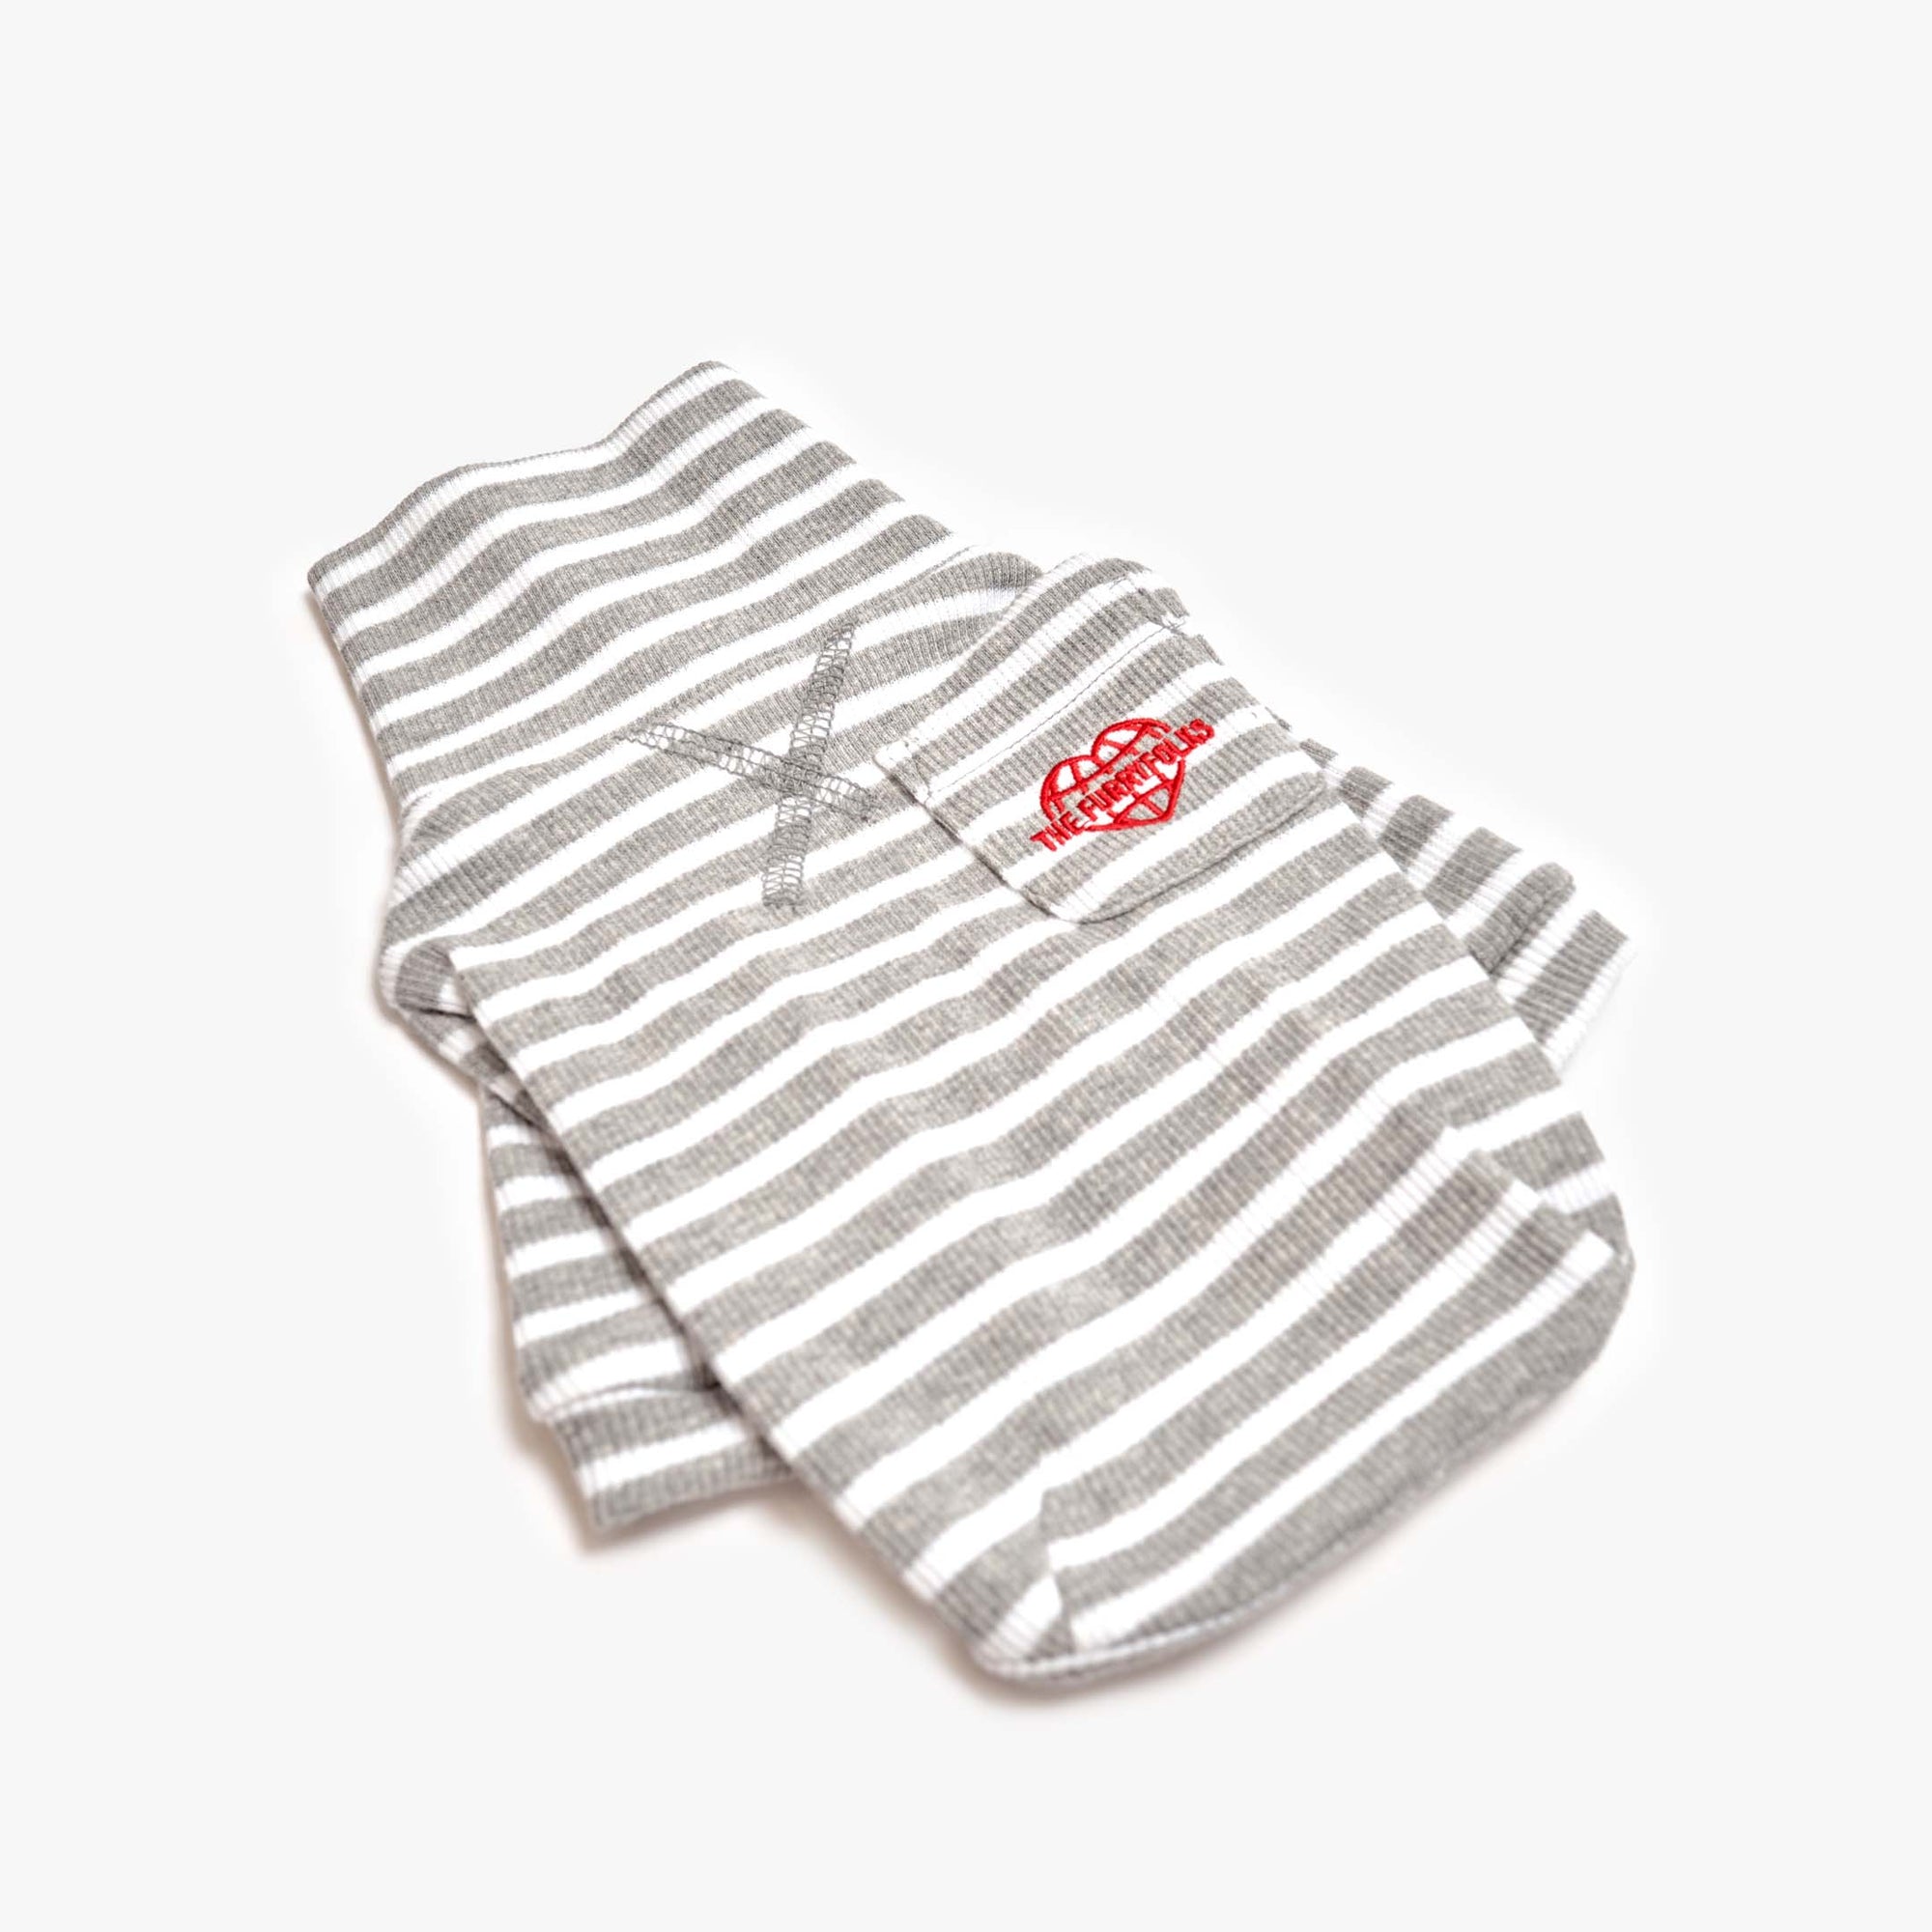  Heather Gray & Ivory  striped dog shirt with heart logo, designed for a stylish and snug pet fit.